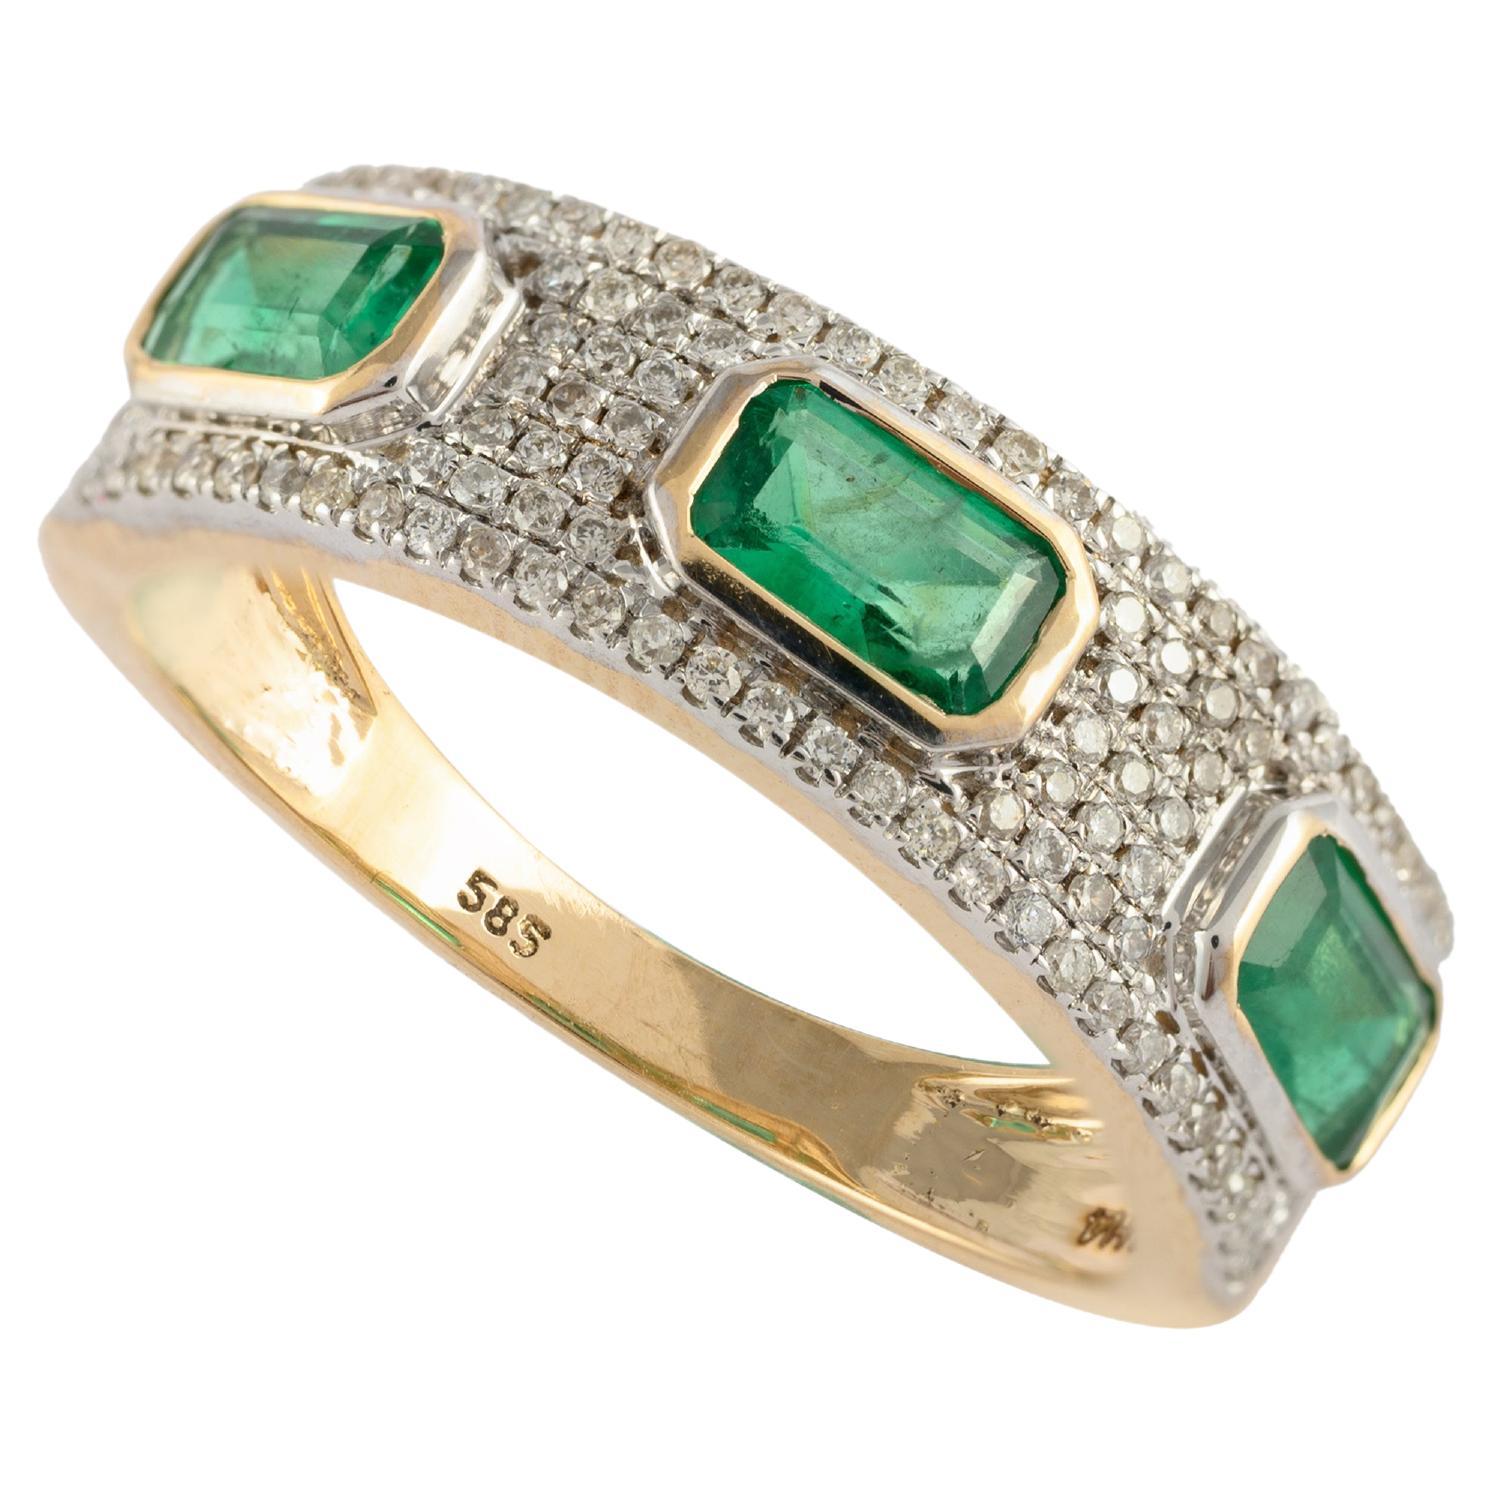 For Sale:  Impeccable Three Stone Emerald and Diamond Engagement Ring in 14k Yellow Gold